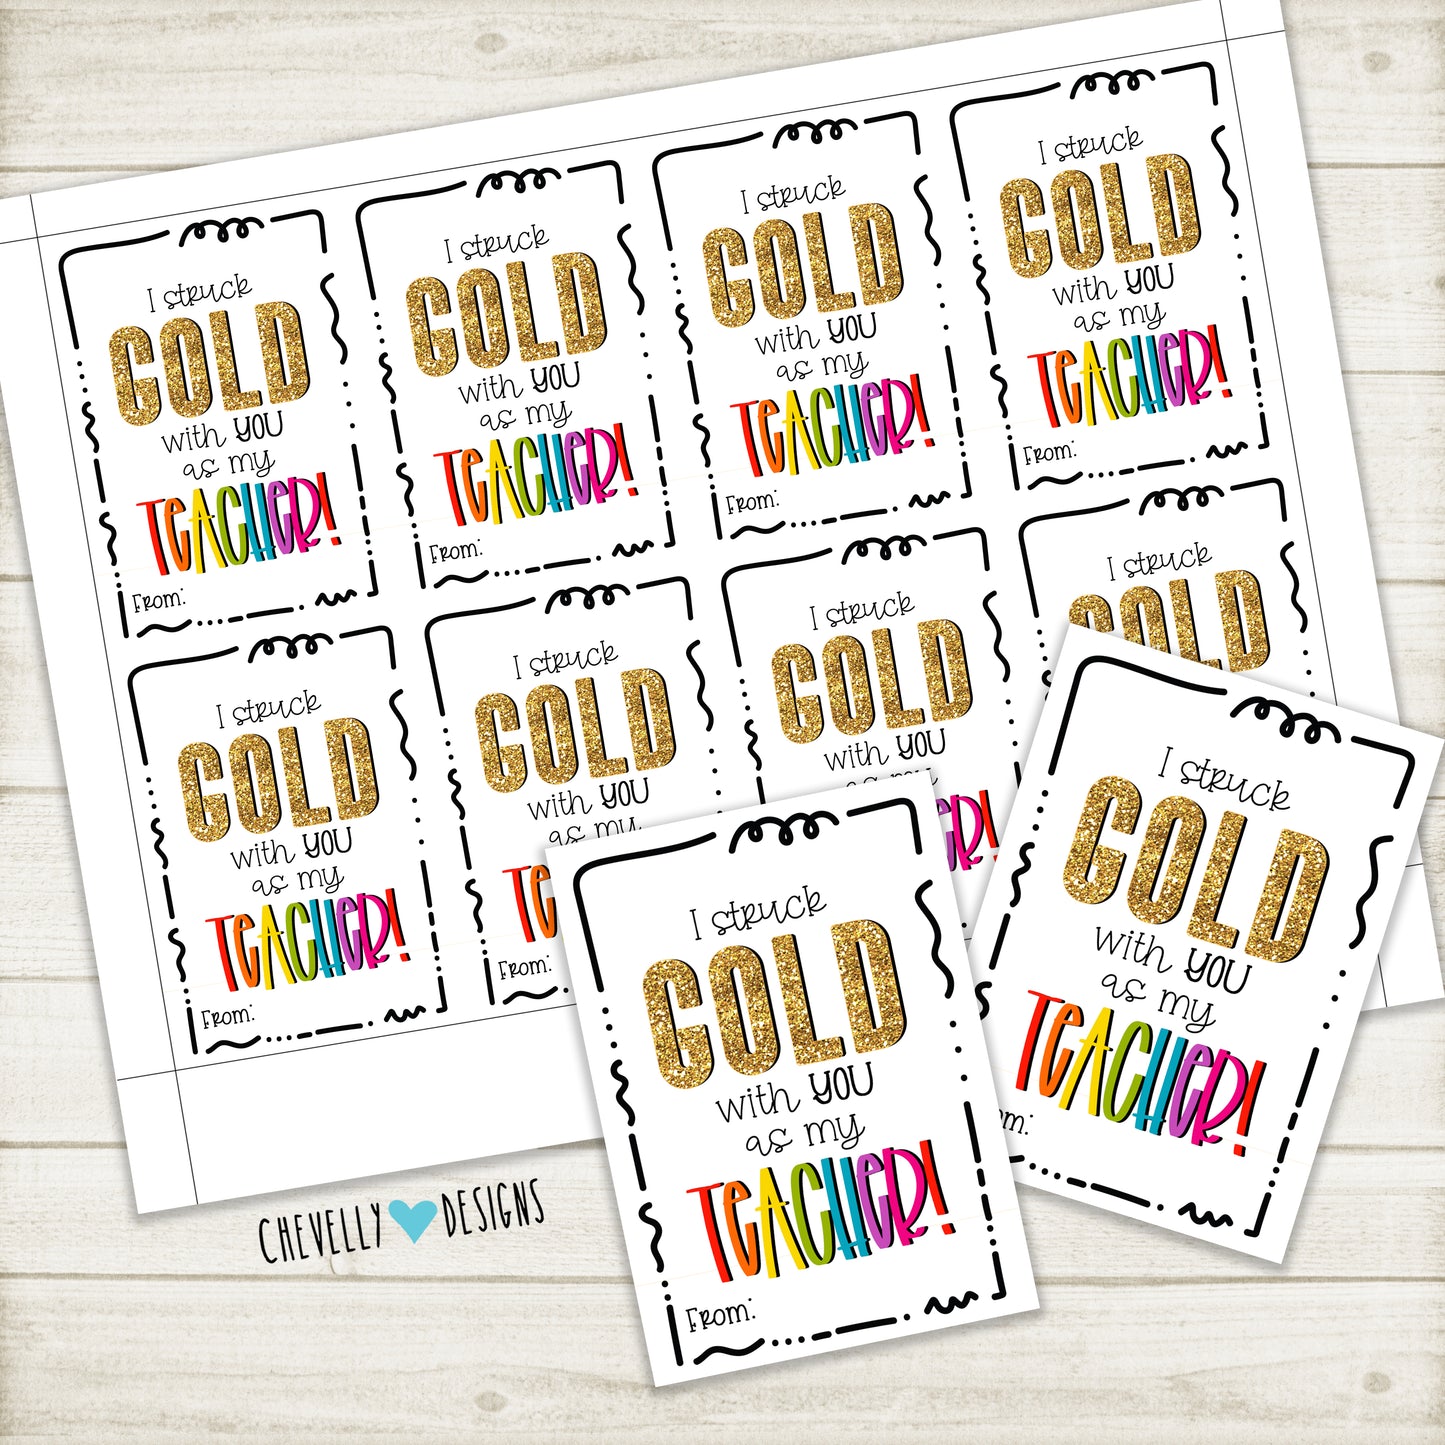 Printable Back to School Gift Tags - I struck GOLD with you as my TEACHER - Instant Digital Download